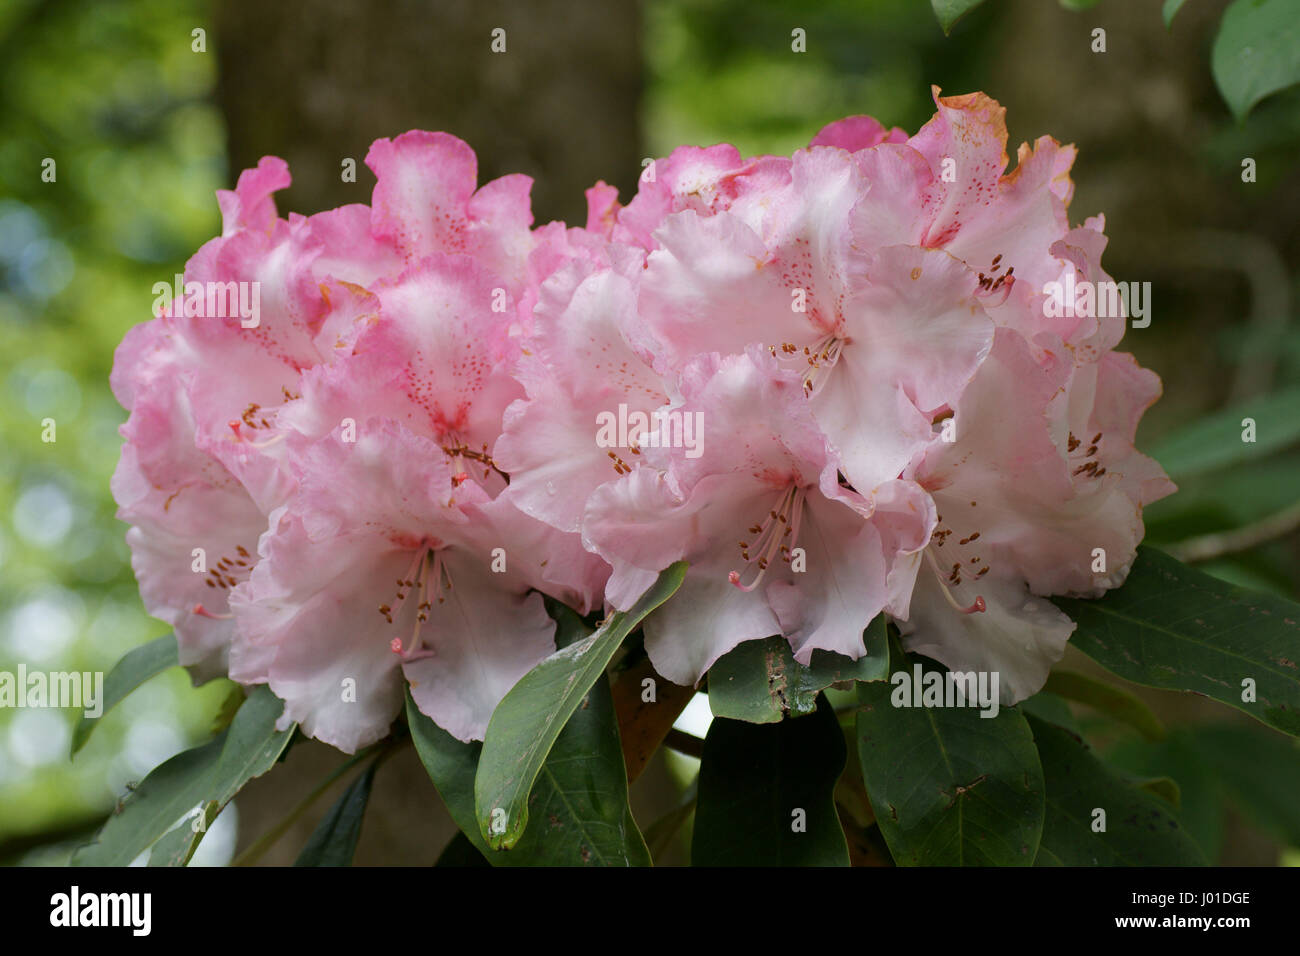 Rhododendron 'Lem's Monarch' Stock Photo